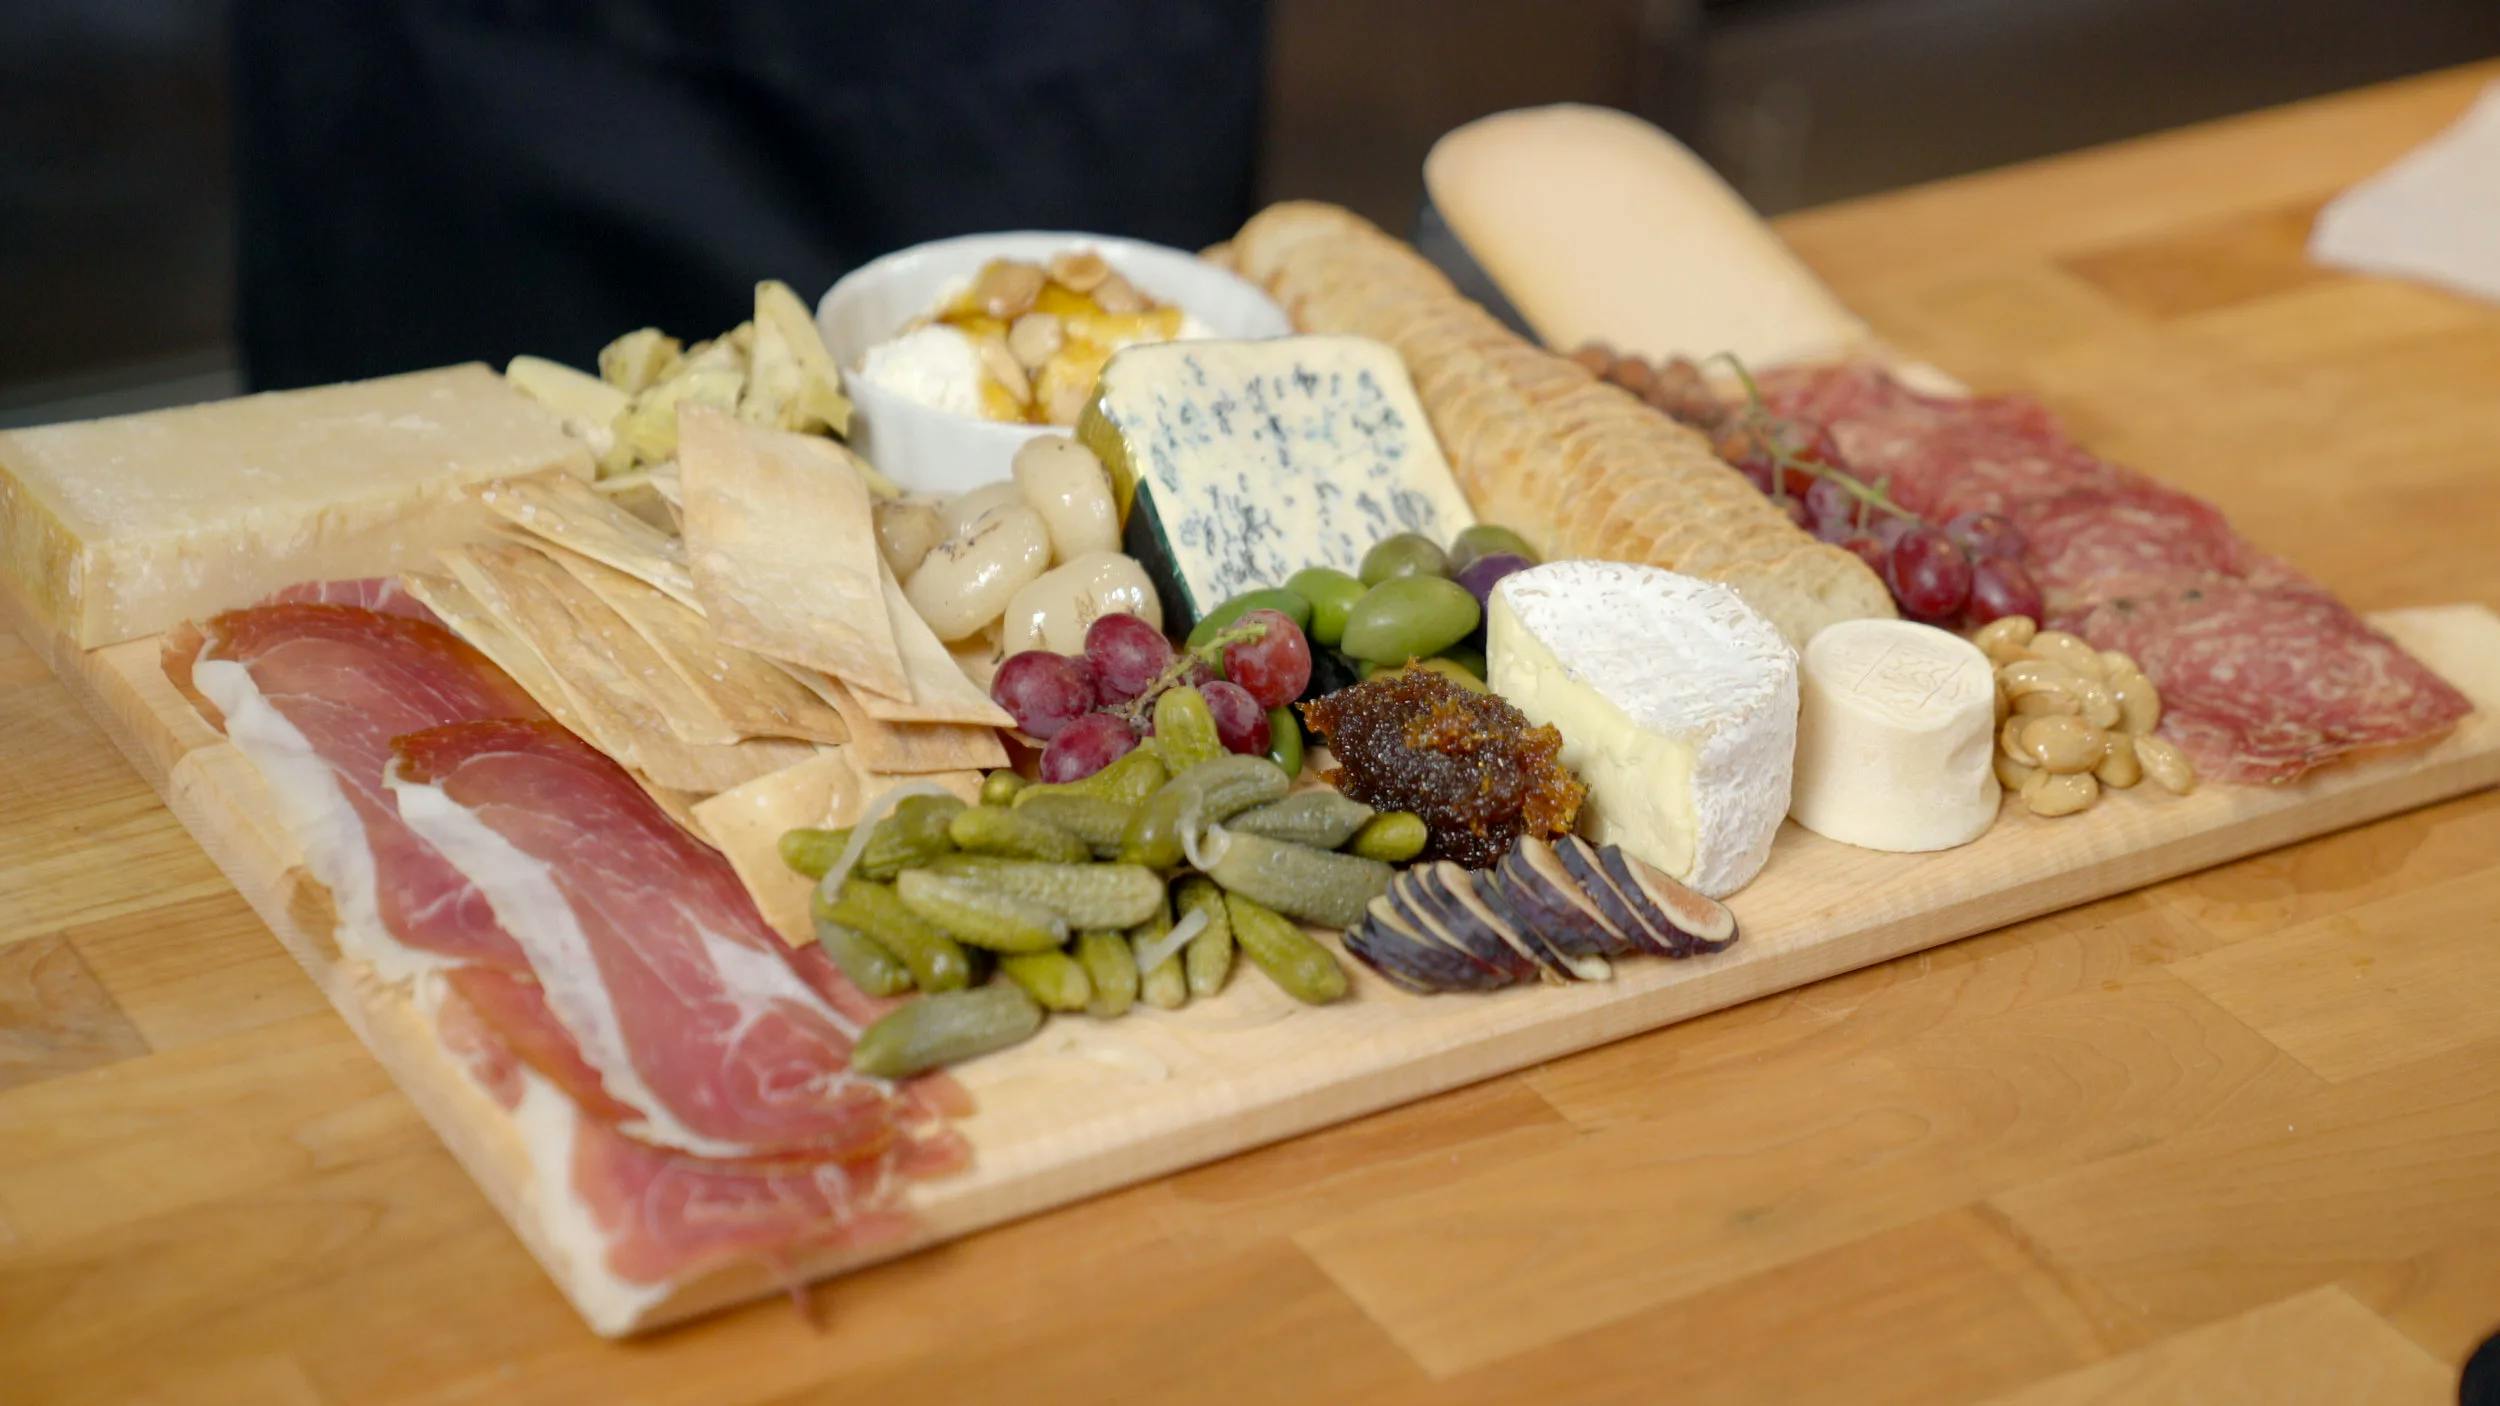 Picture for CHARCUTERIE & CHEESE BOARDS